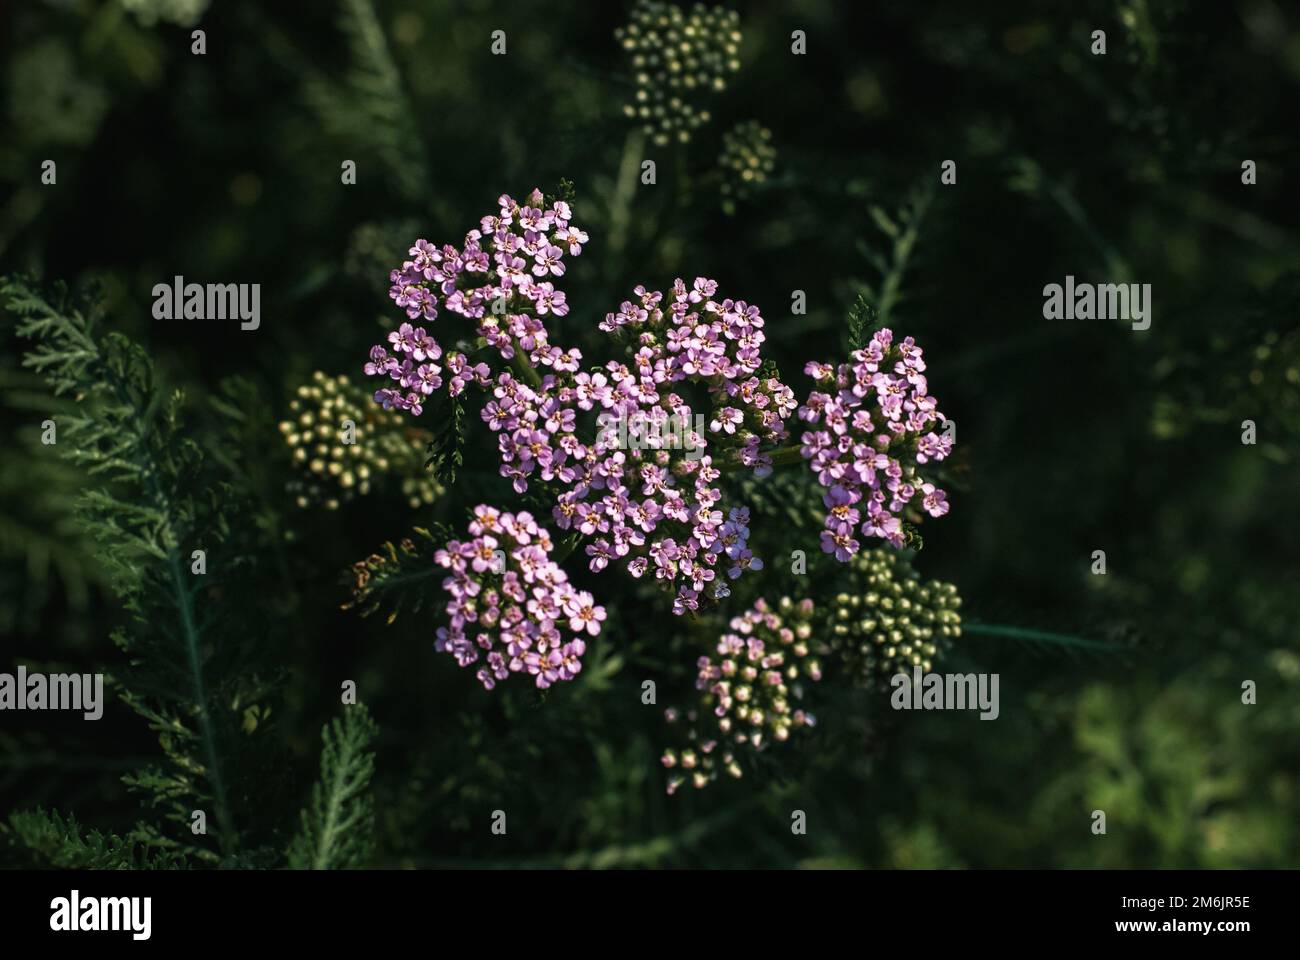 Pink yarrow at night, medicinal herb, milfoil plant blooming in the evening garden Stock Photo